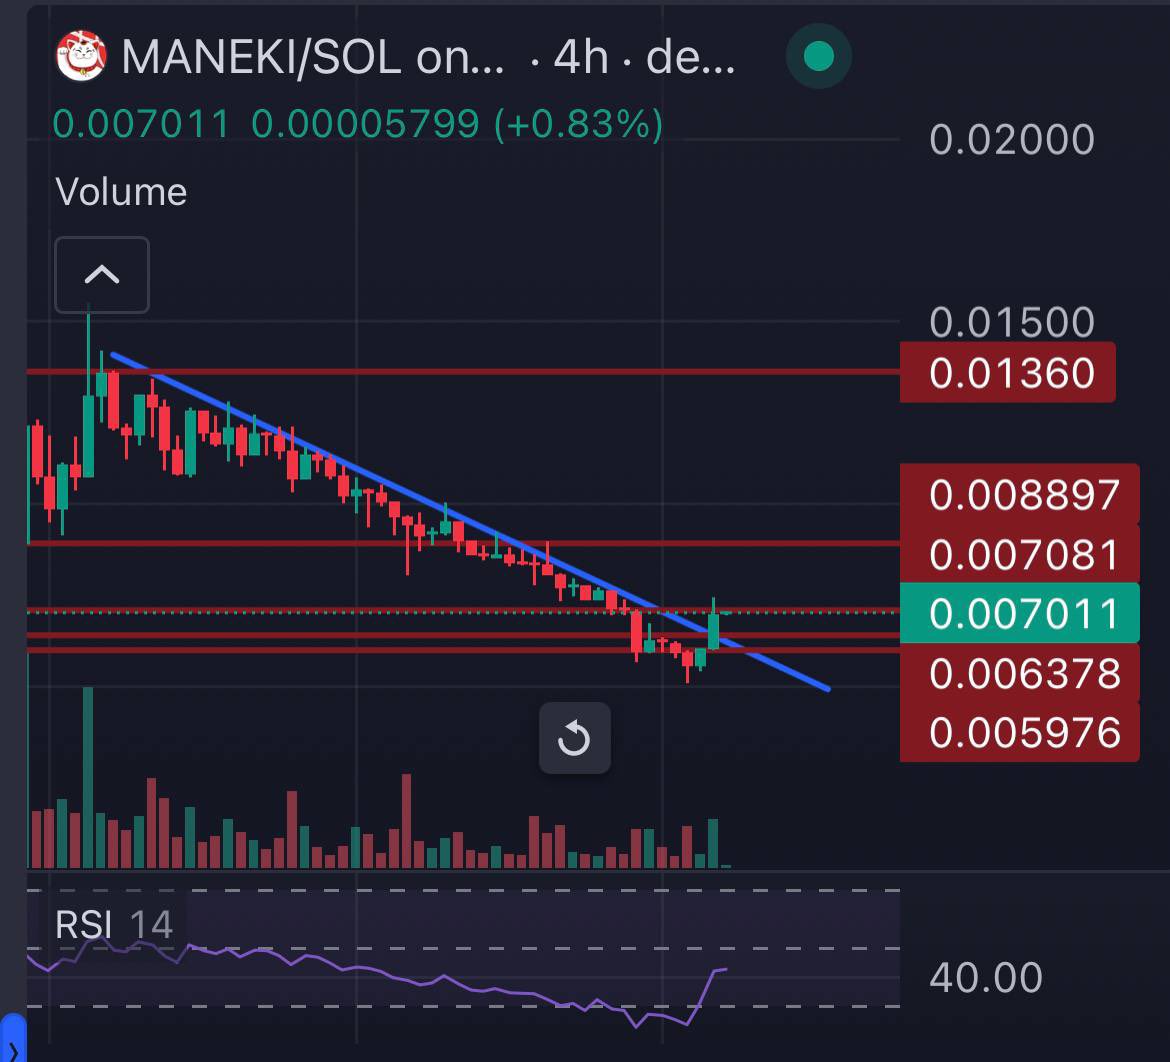 Hoping this is bottom on many solana memecoins. the bottom on $Maneki … let’s see. Strong 4H candle closing out here. Team still crushing it. Let’s get a reversal here. Added few other cat coins ($Mew) and $Boden too